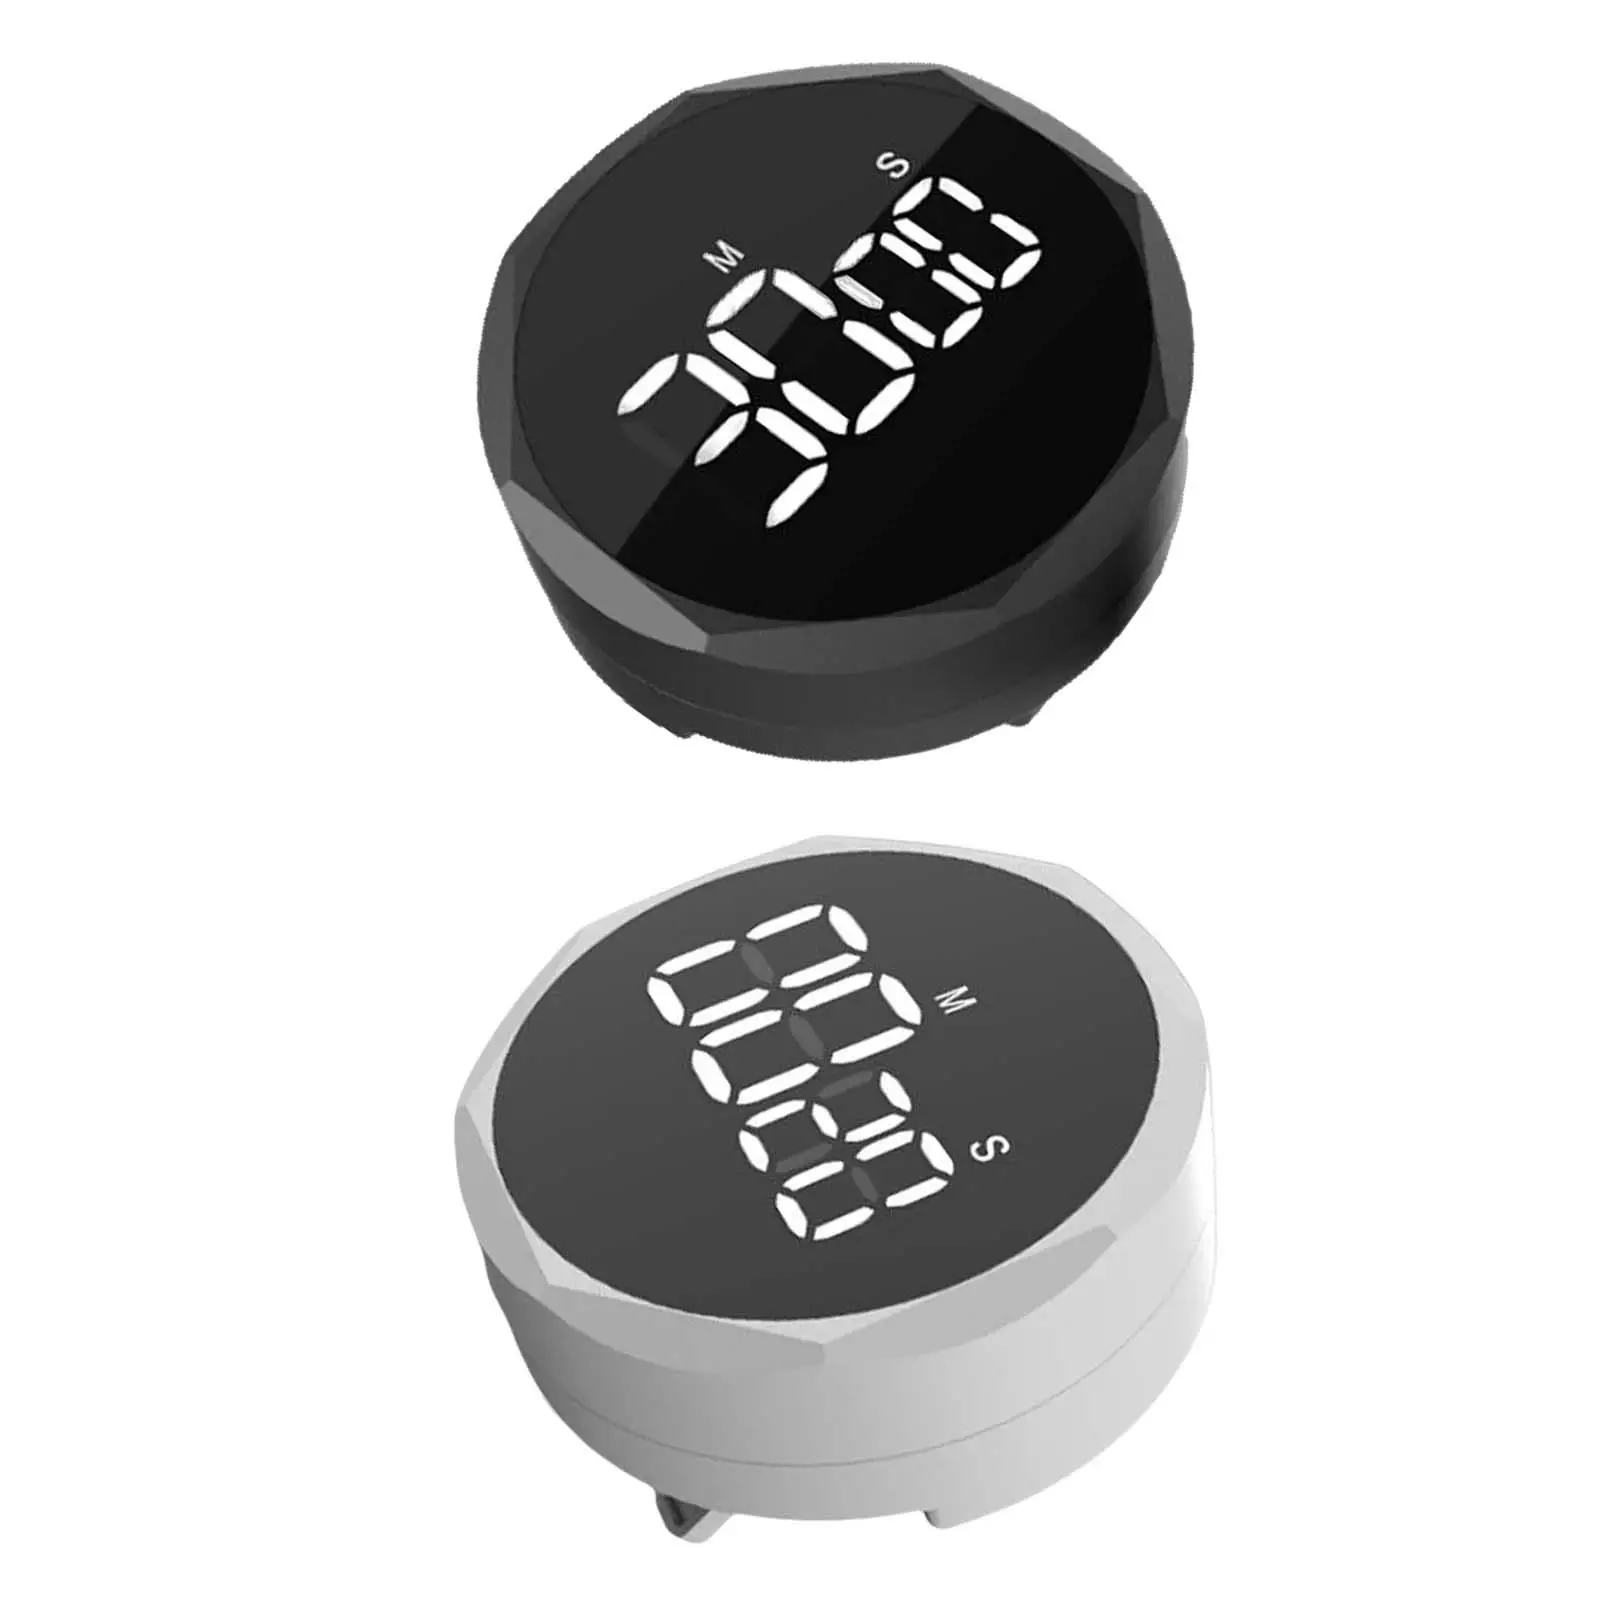 Digital Reminder Timer Adjustable Reminder LCD Display Motion timers Stopwatch for Barbecue Meetings Gaming Fitness Adults Kids